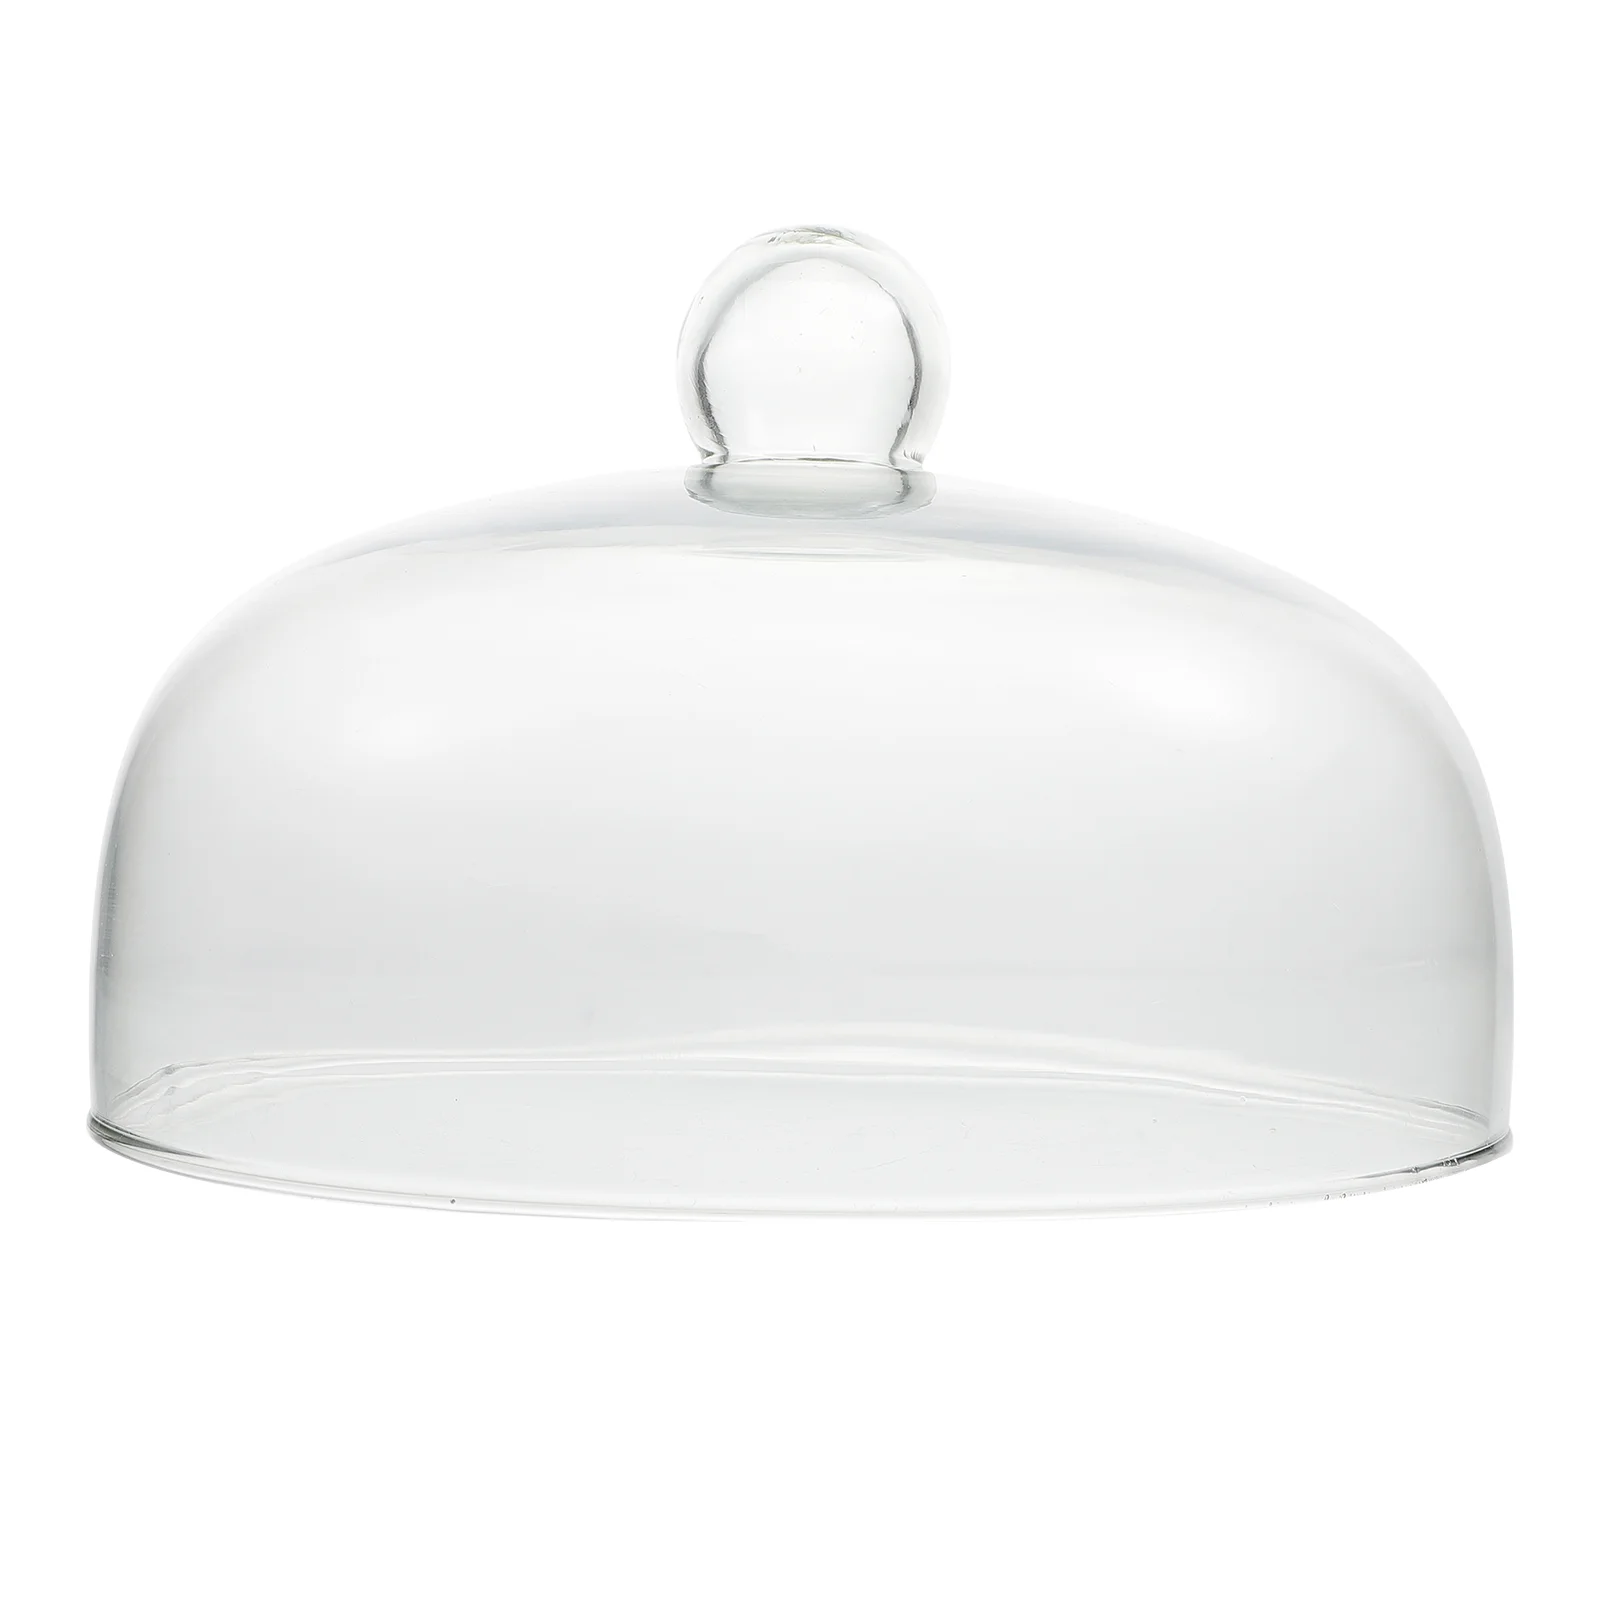 

Dome Cover Cake Display Dessert Cloche Stand Clear Serving Lid Plate Cheese Platter Butter Round Dish Tent Kitchen Lids Bell Fly